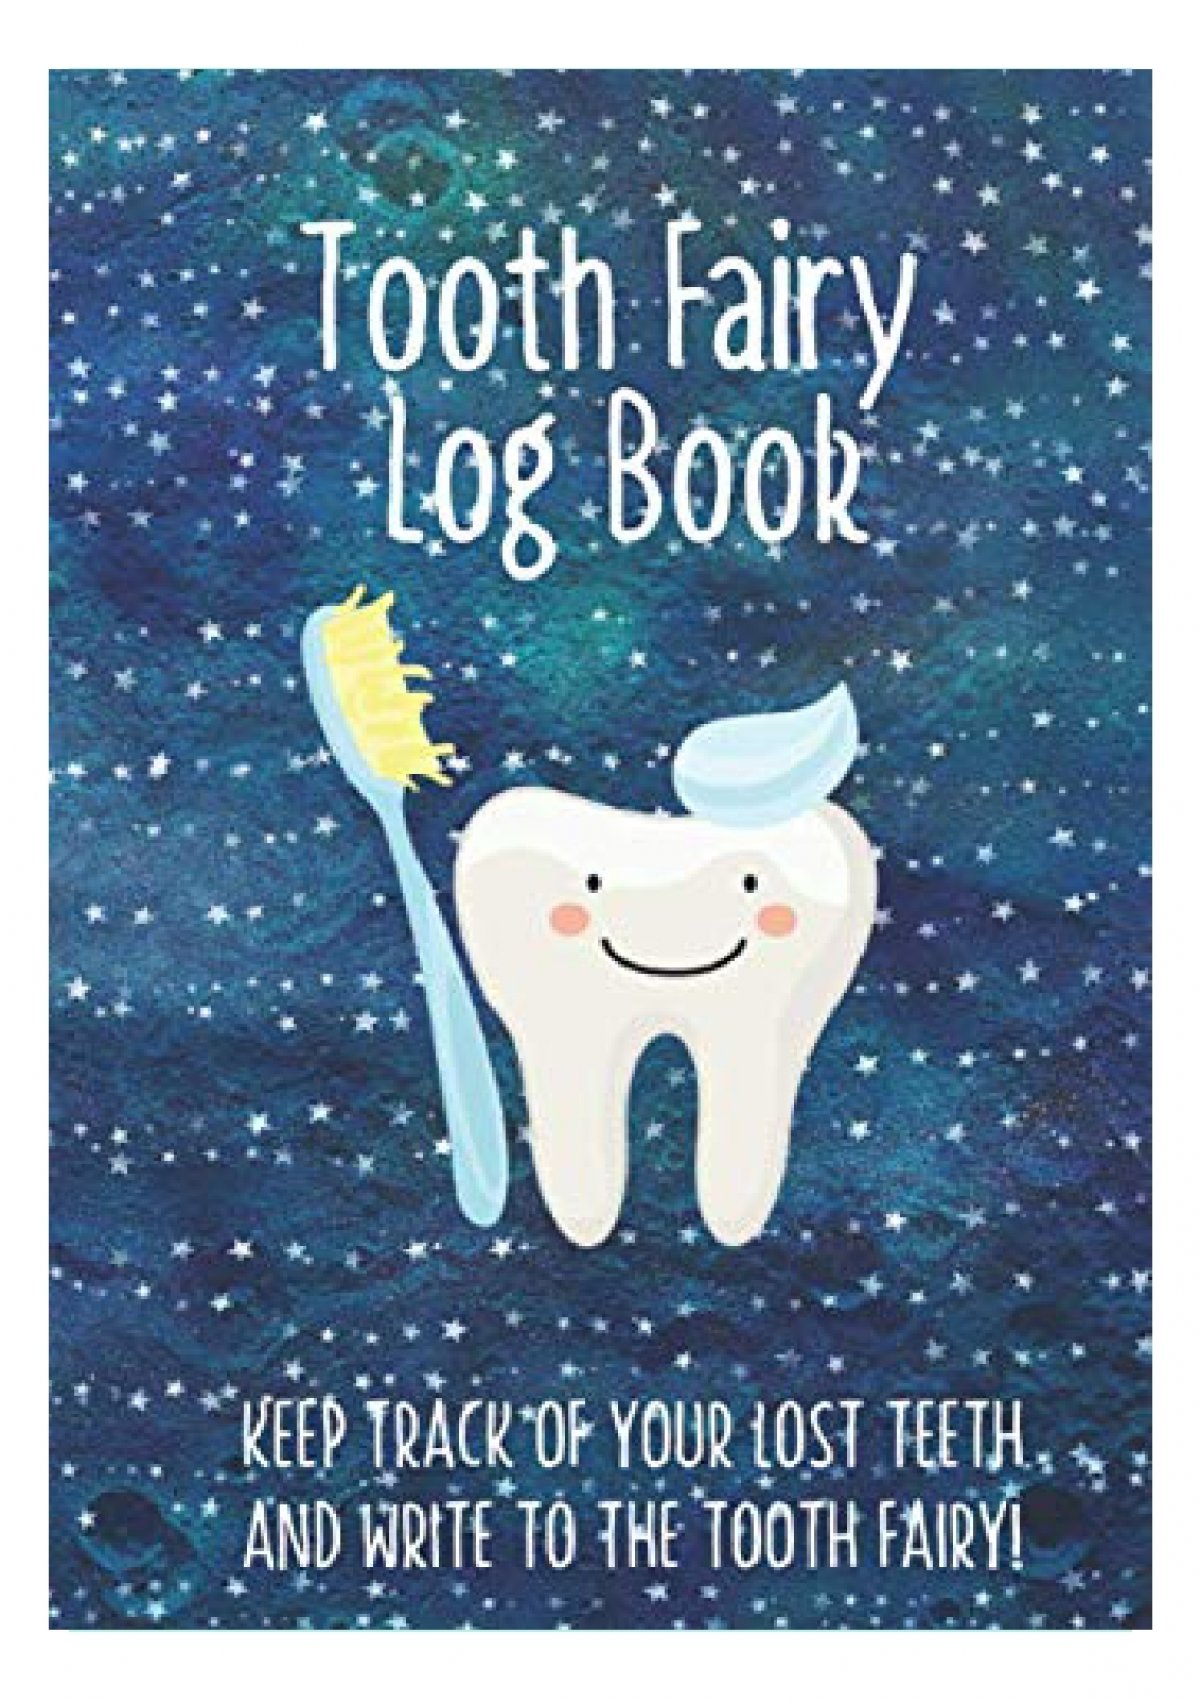 download-tooth-fairy-log-book-keep-track-of-your-lost-teeth-and-write-to-the-tooth-fairy-for-ipad